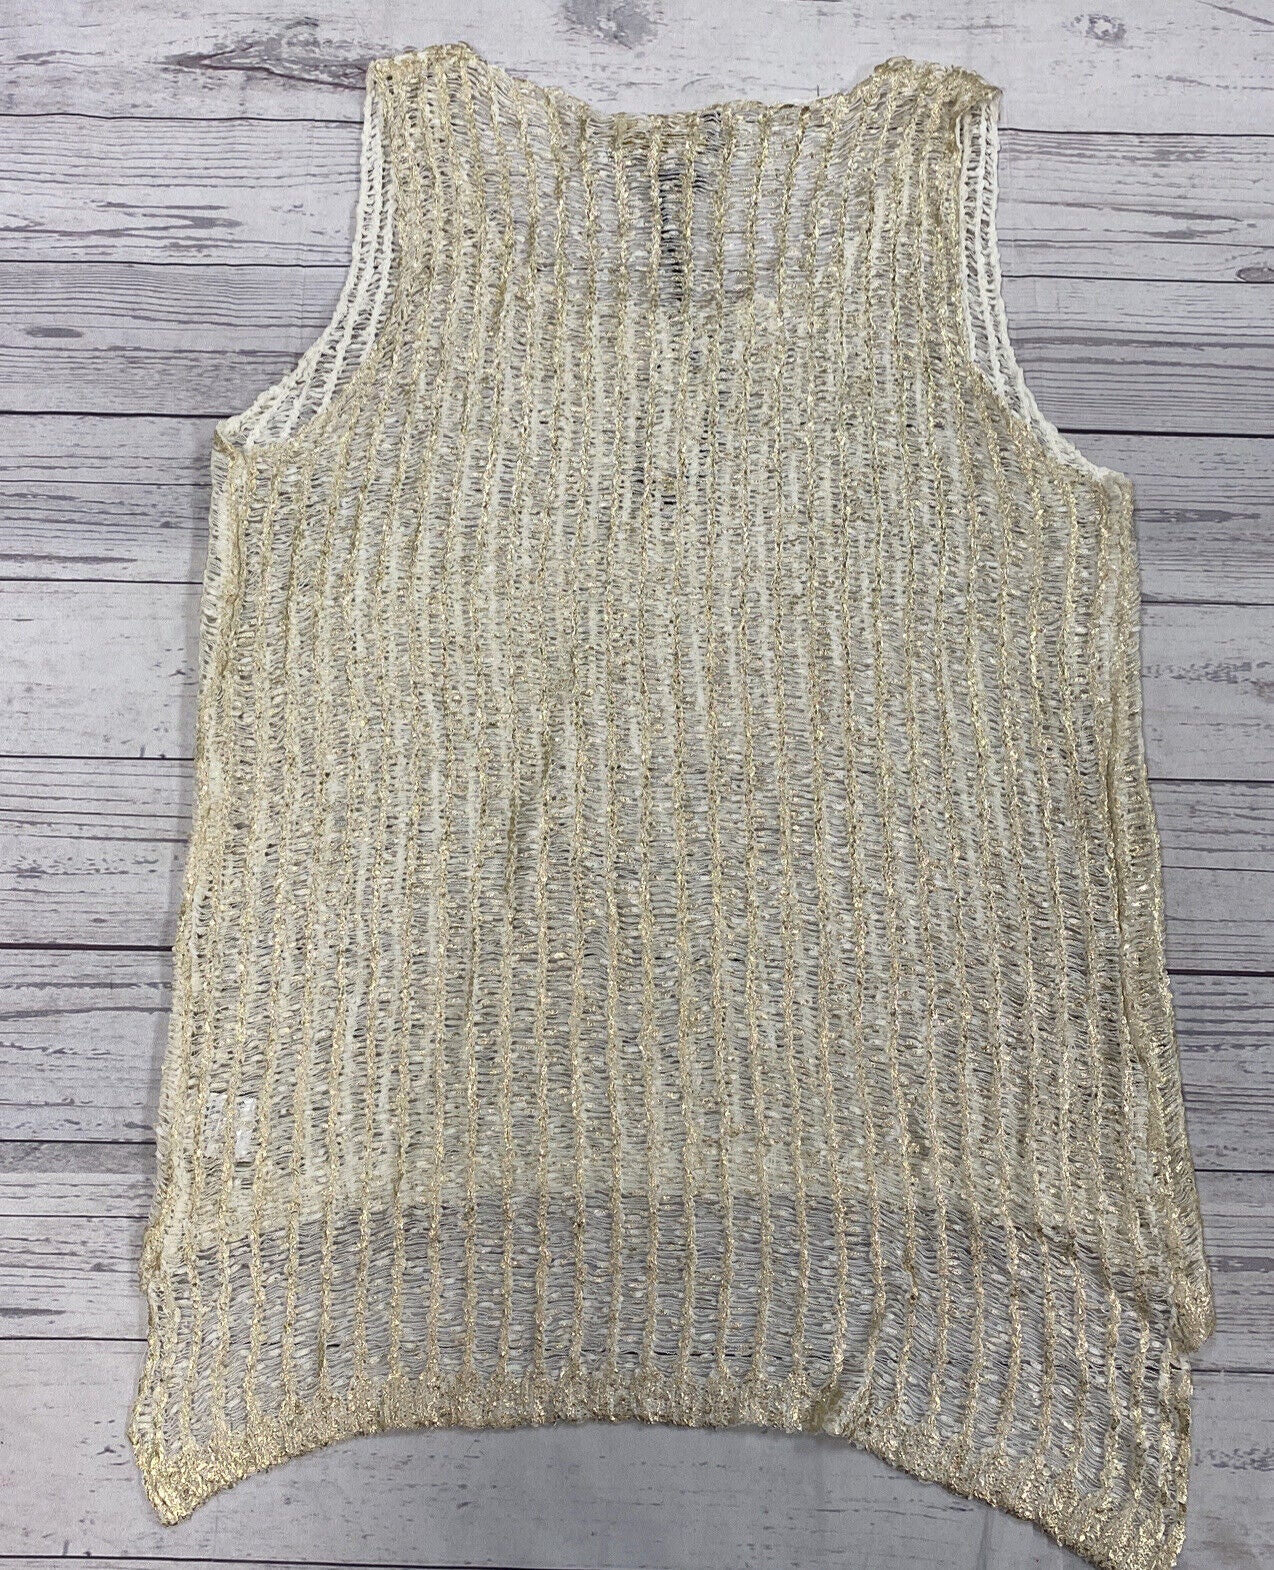 Valiant Paris WI046 Cream And Gold Crocheted Tank Top￼ Women's Size M/ -  beyond exchange